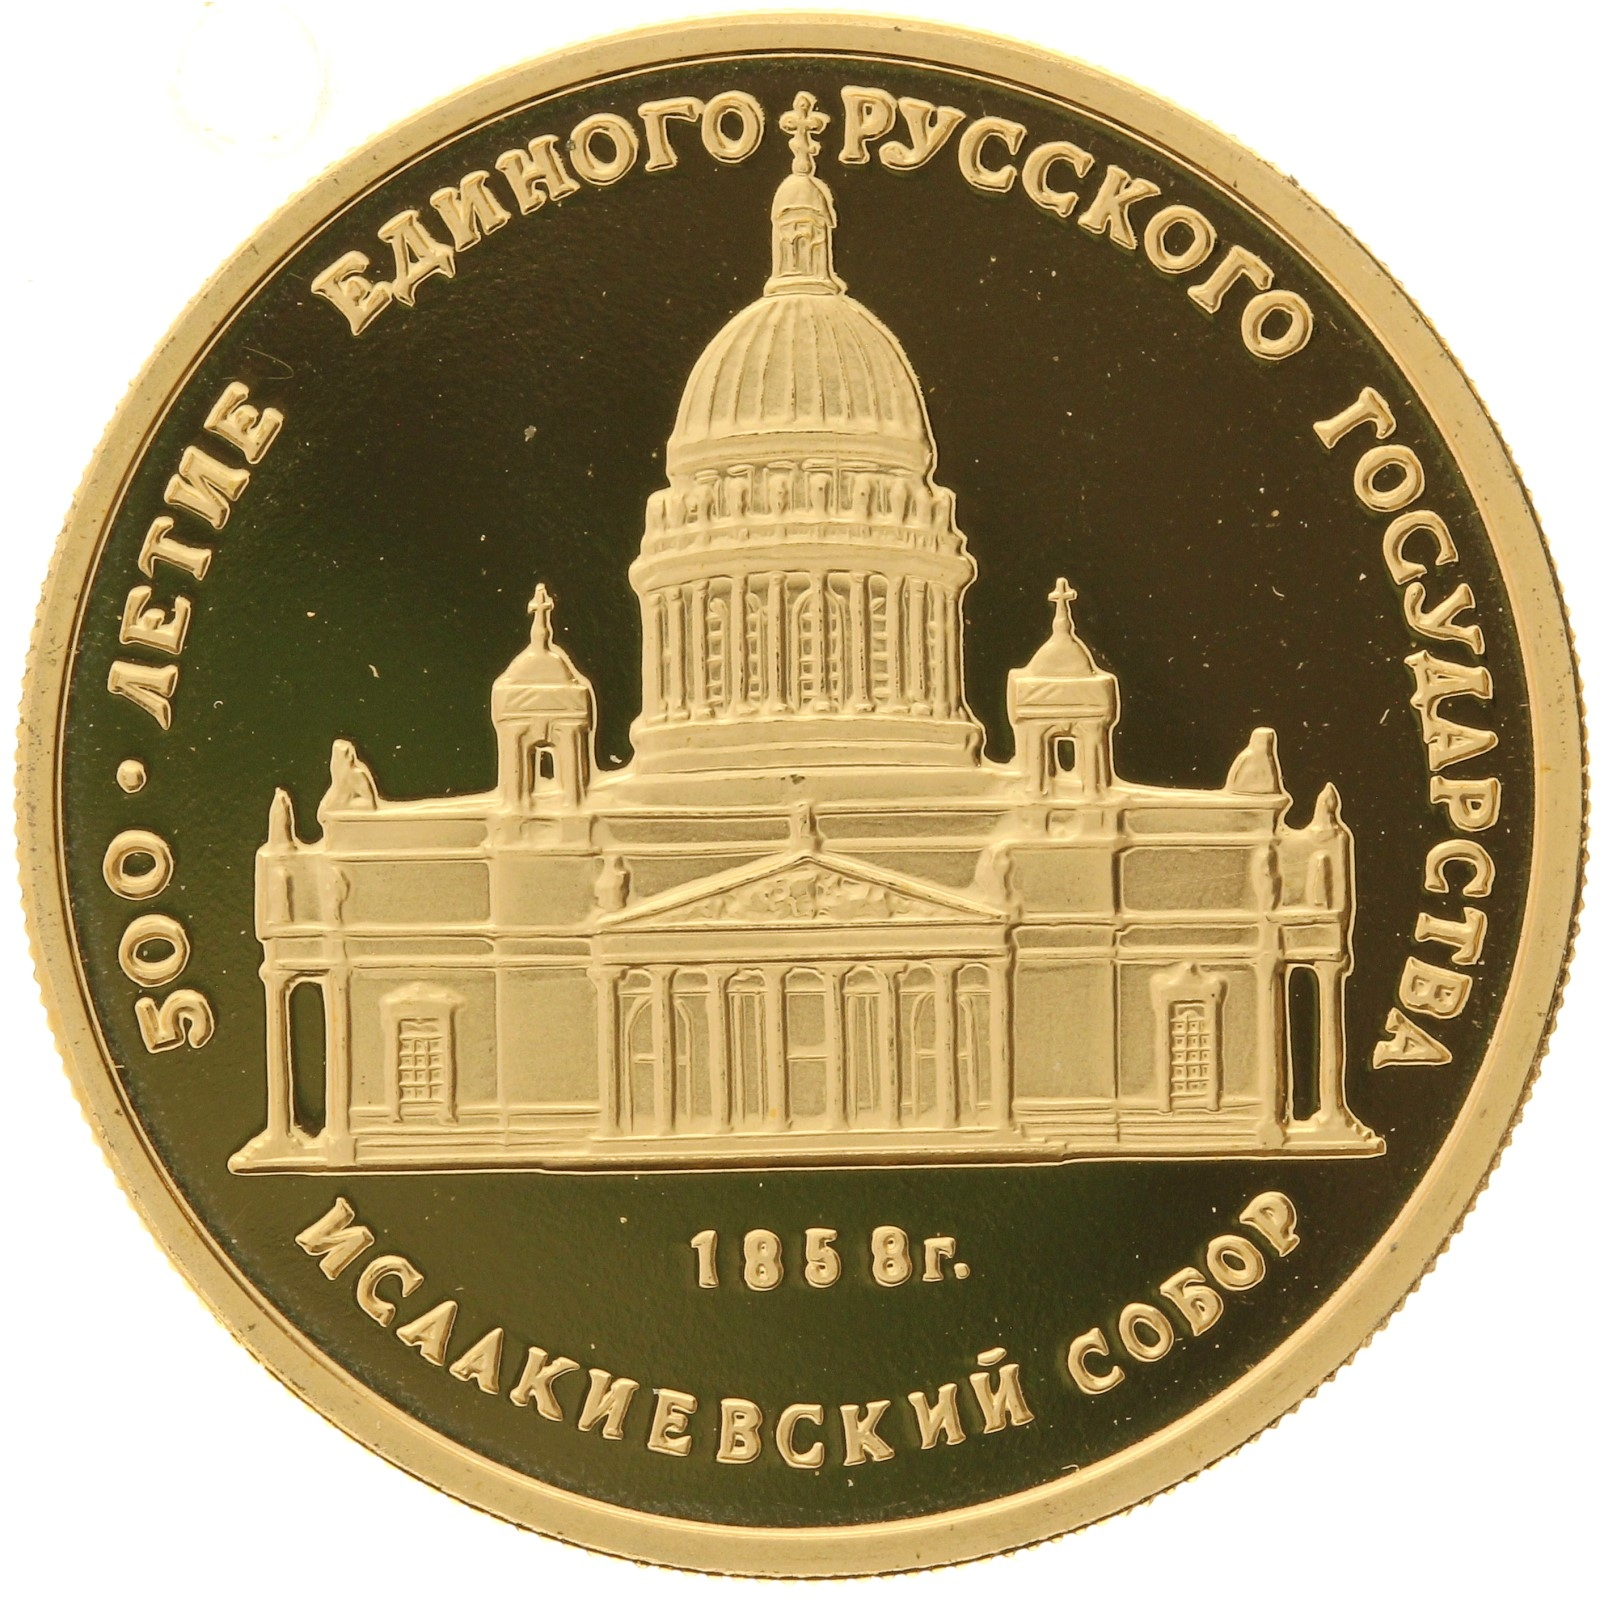 USSR - 50 Rubles - 1991 - Saint Isaac's Cathedral - 1/4oz